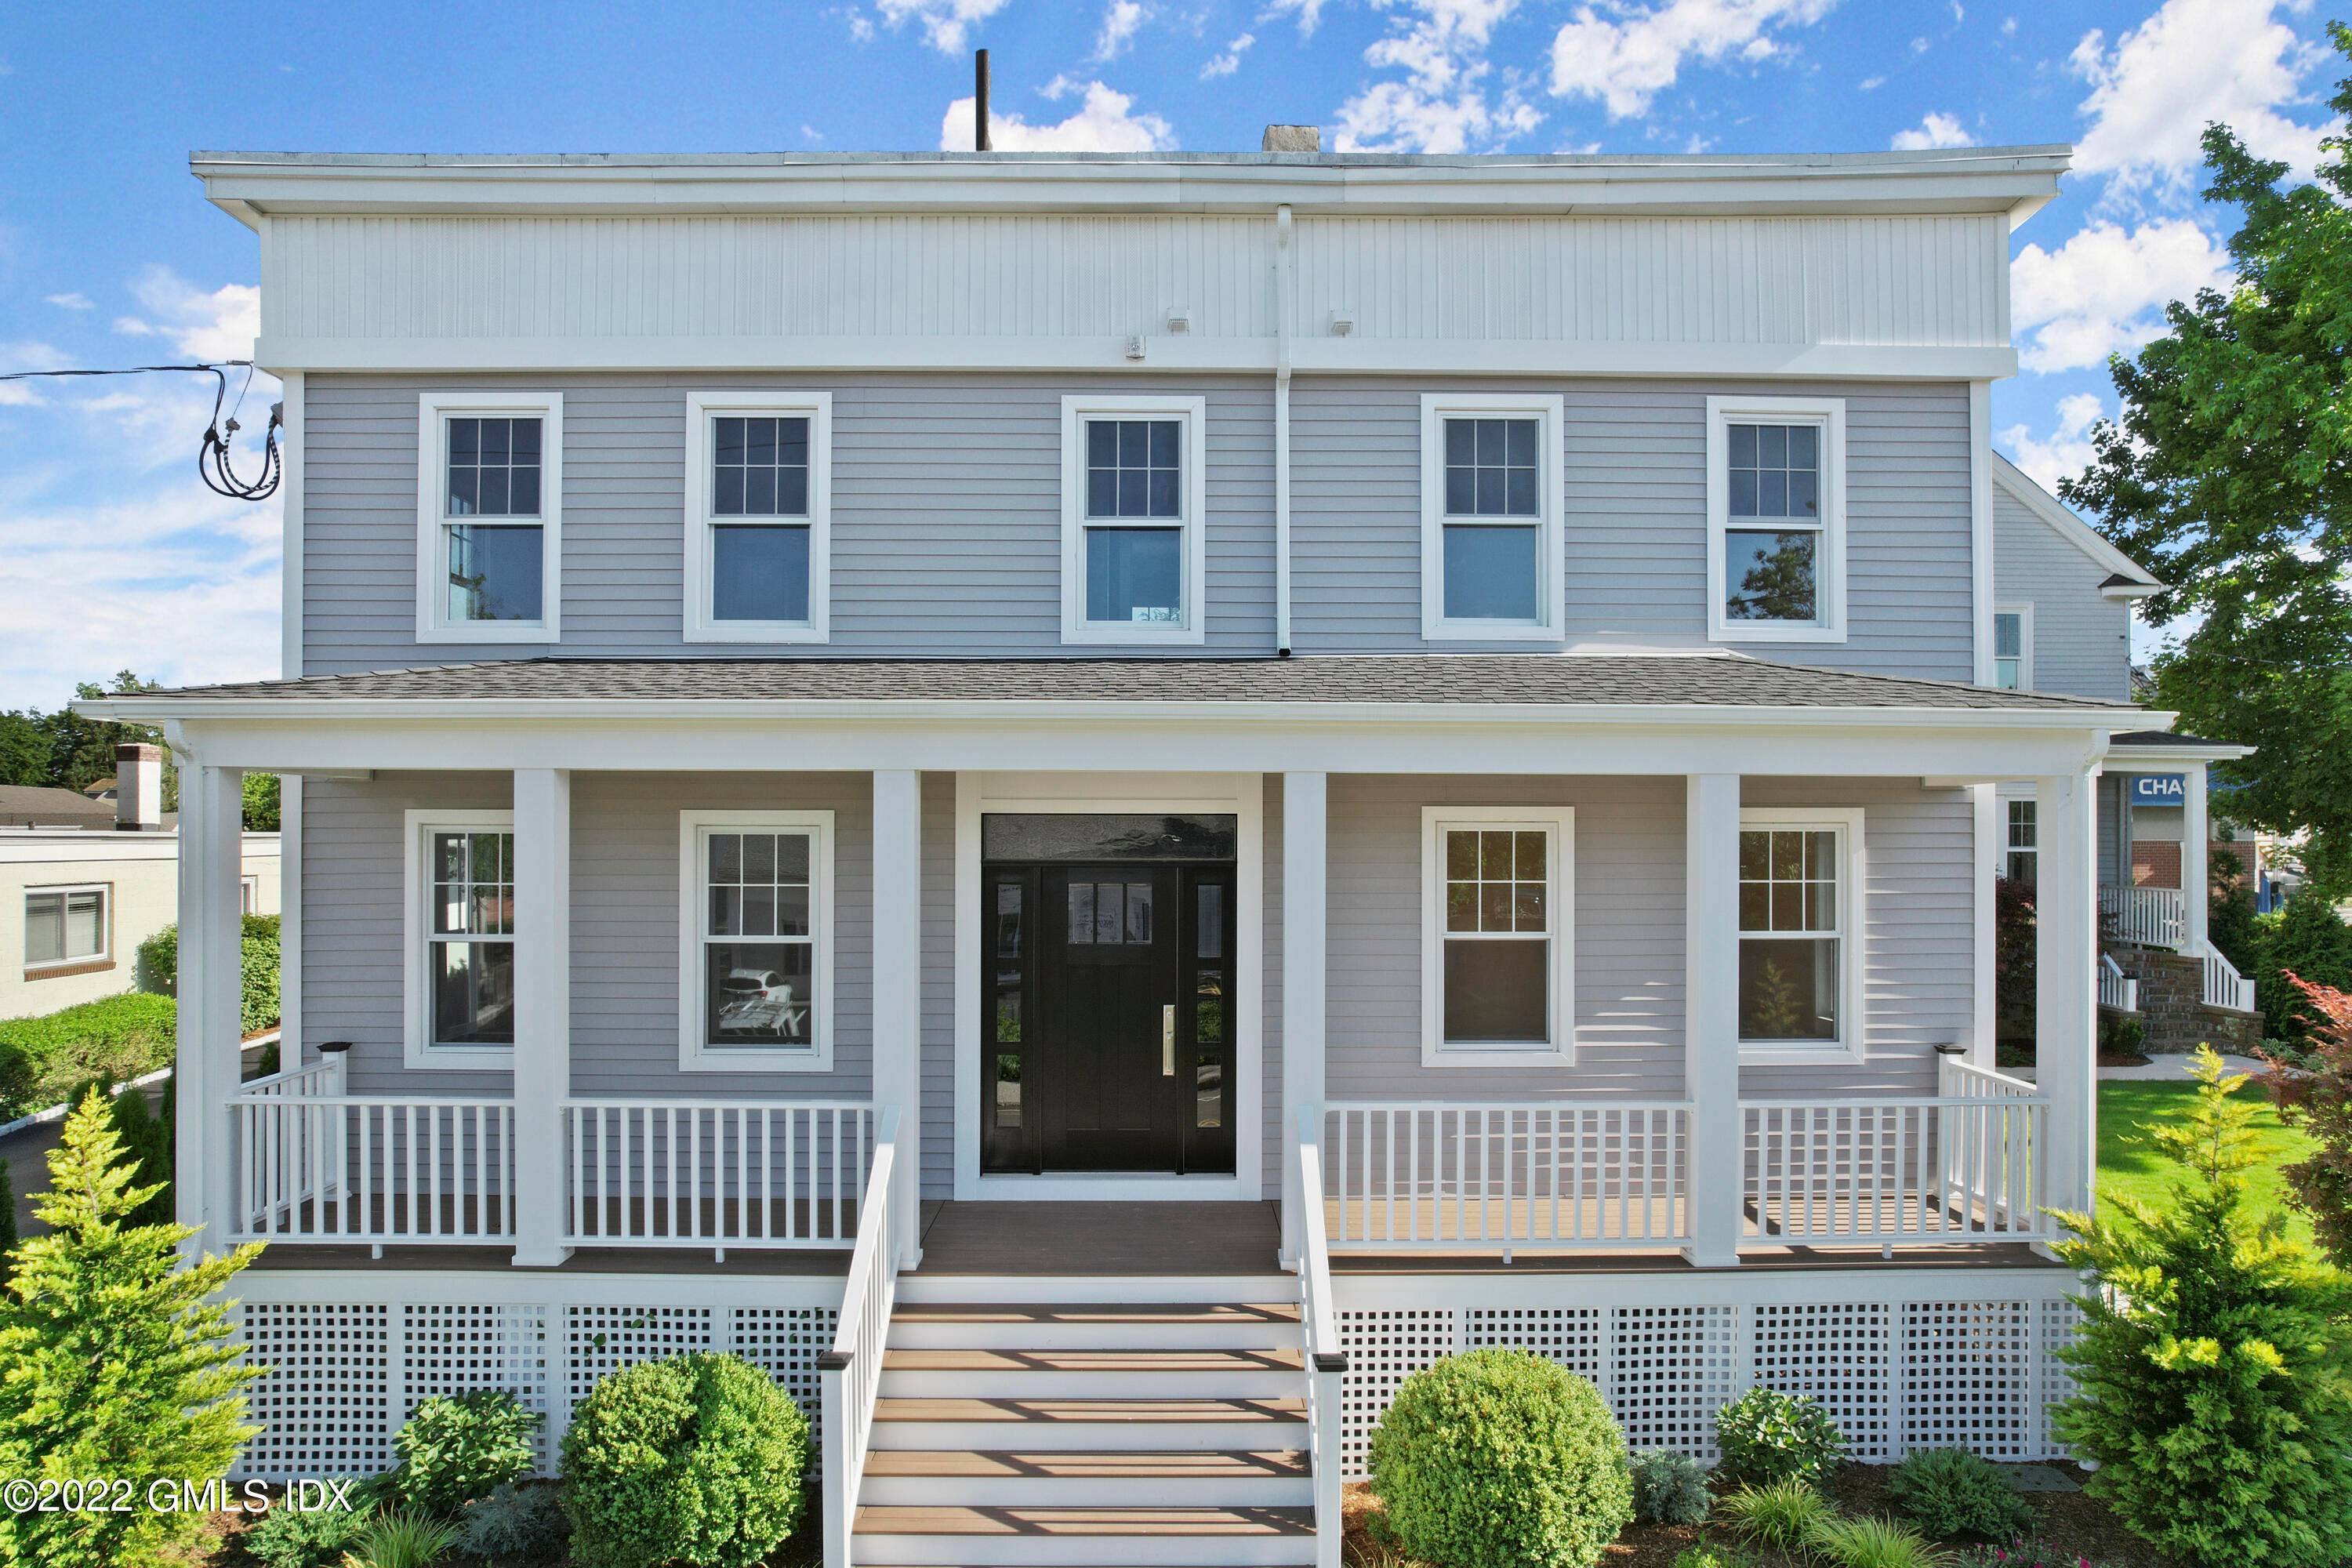 Located in the heart of downtown and just a sidewalk away from everything New Canaan has to offer.